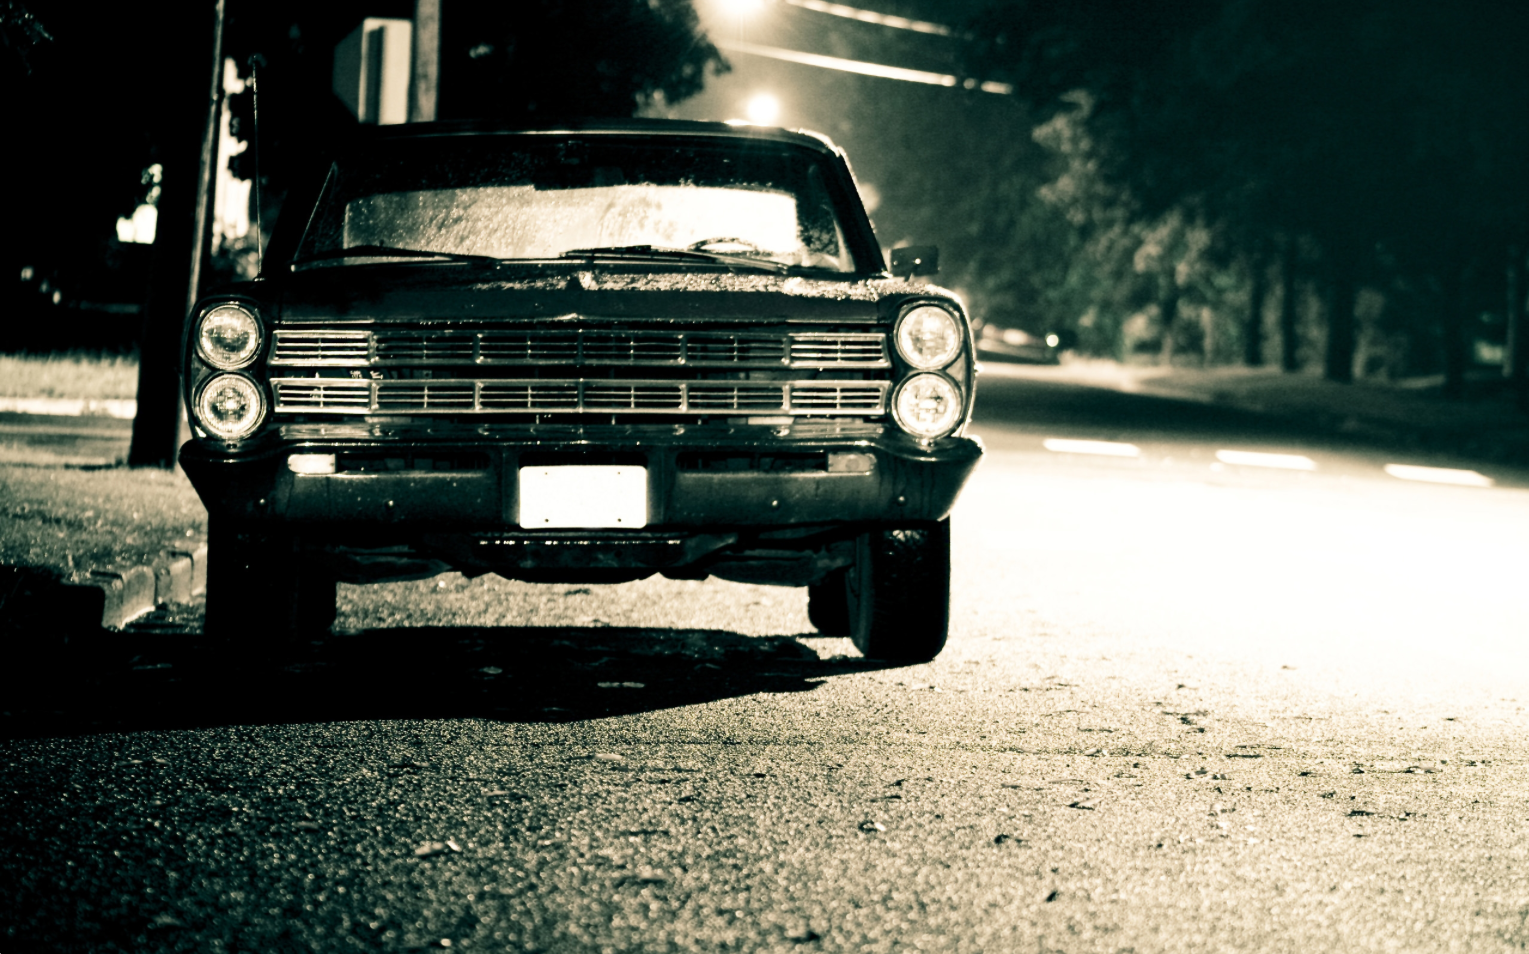 Scary Night Car. Car wallpaper, Car ford, Ford classic cars